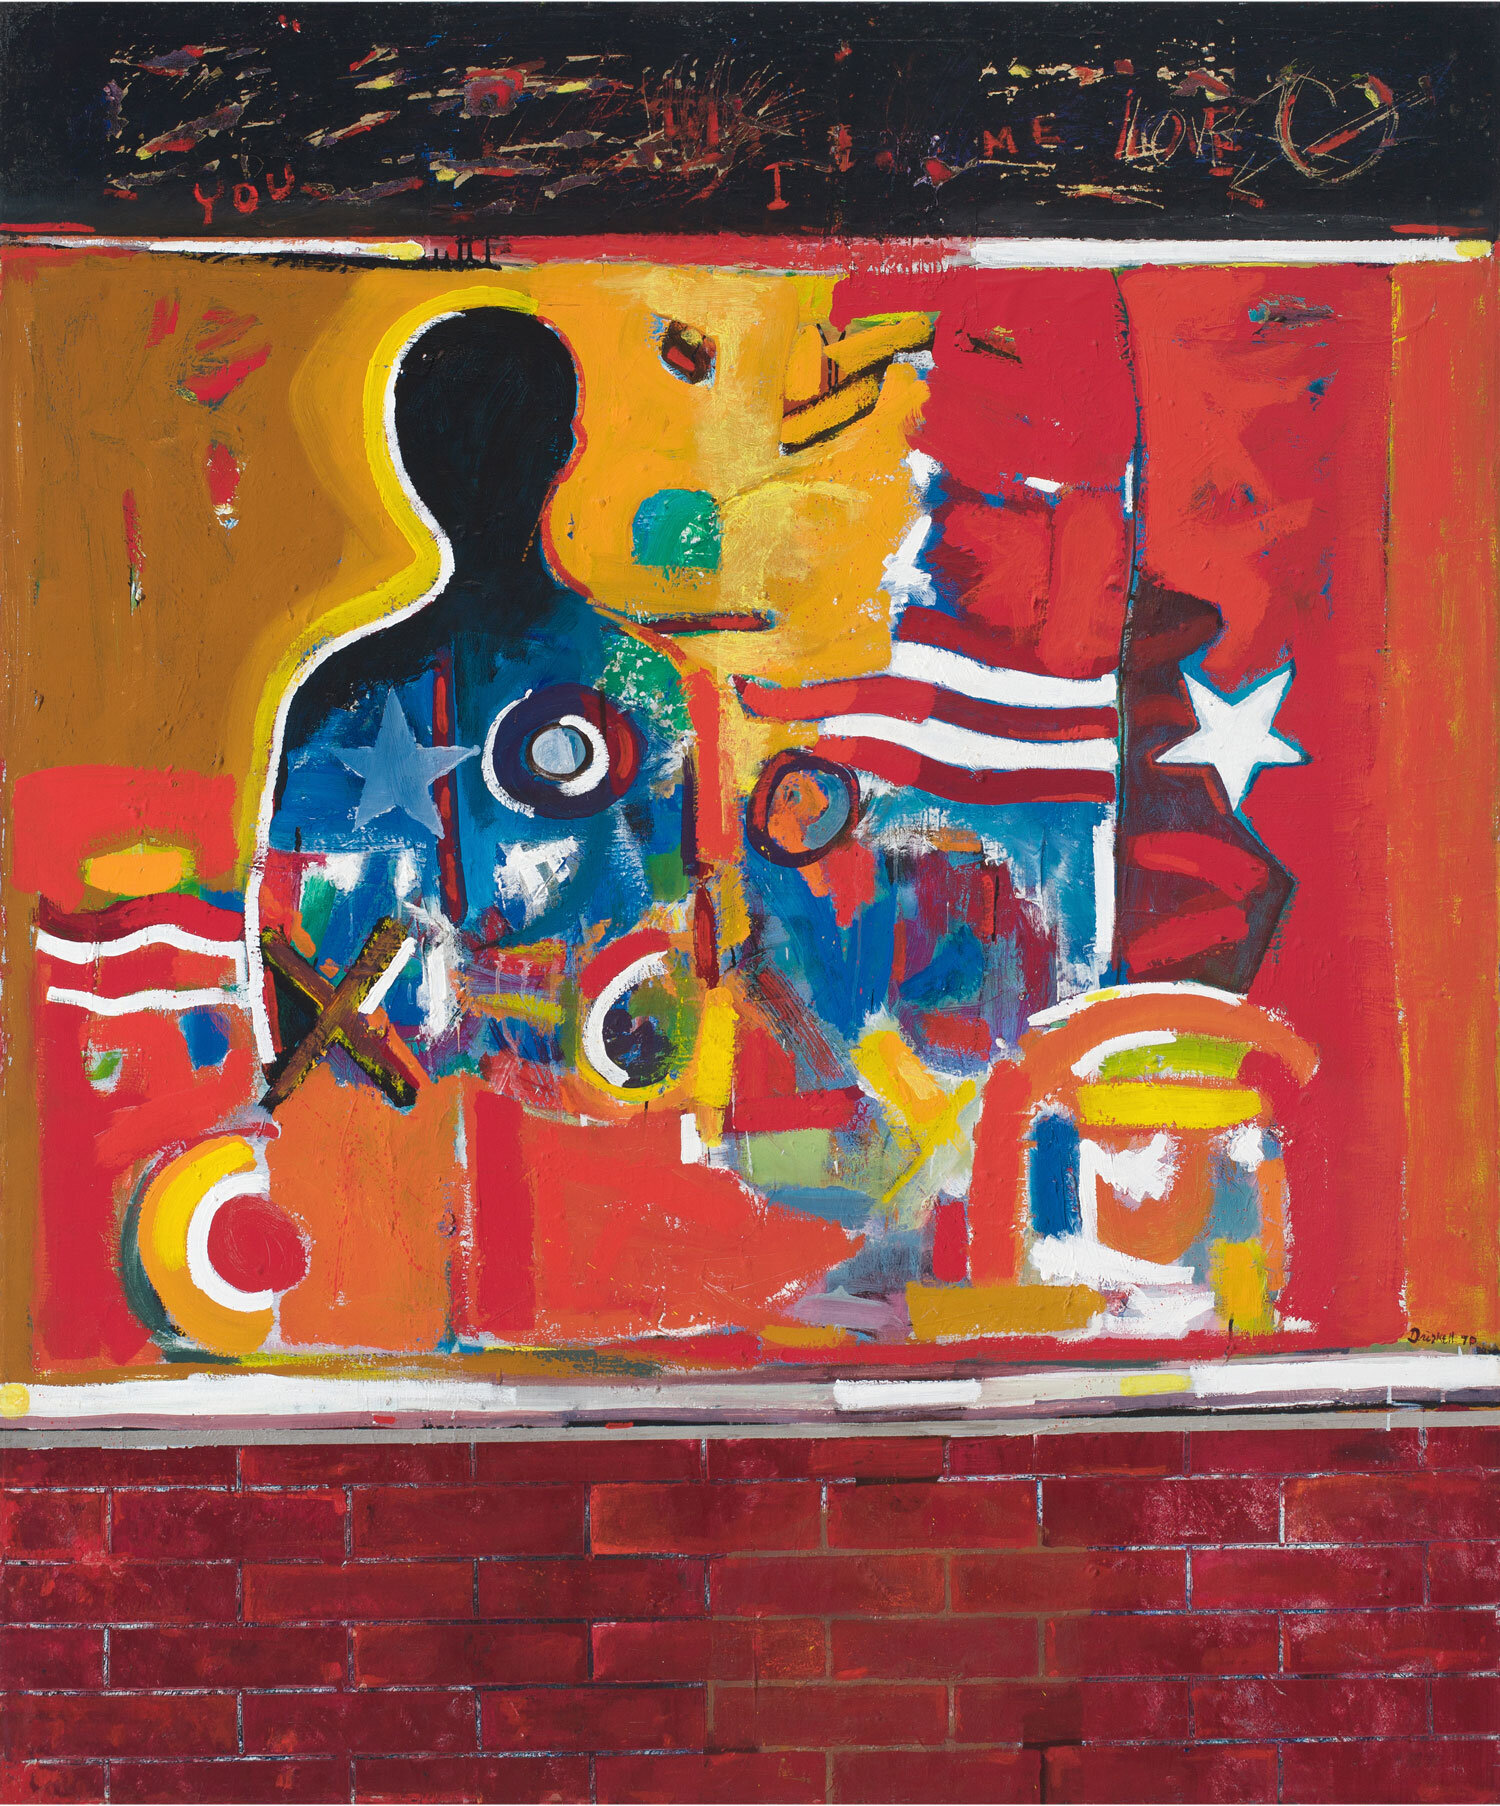 Responding to our Historical Moment, "Ghetto Wall #2" | David Driskell